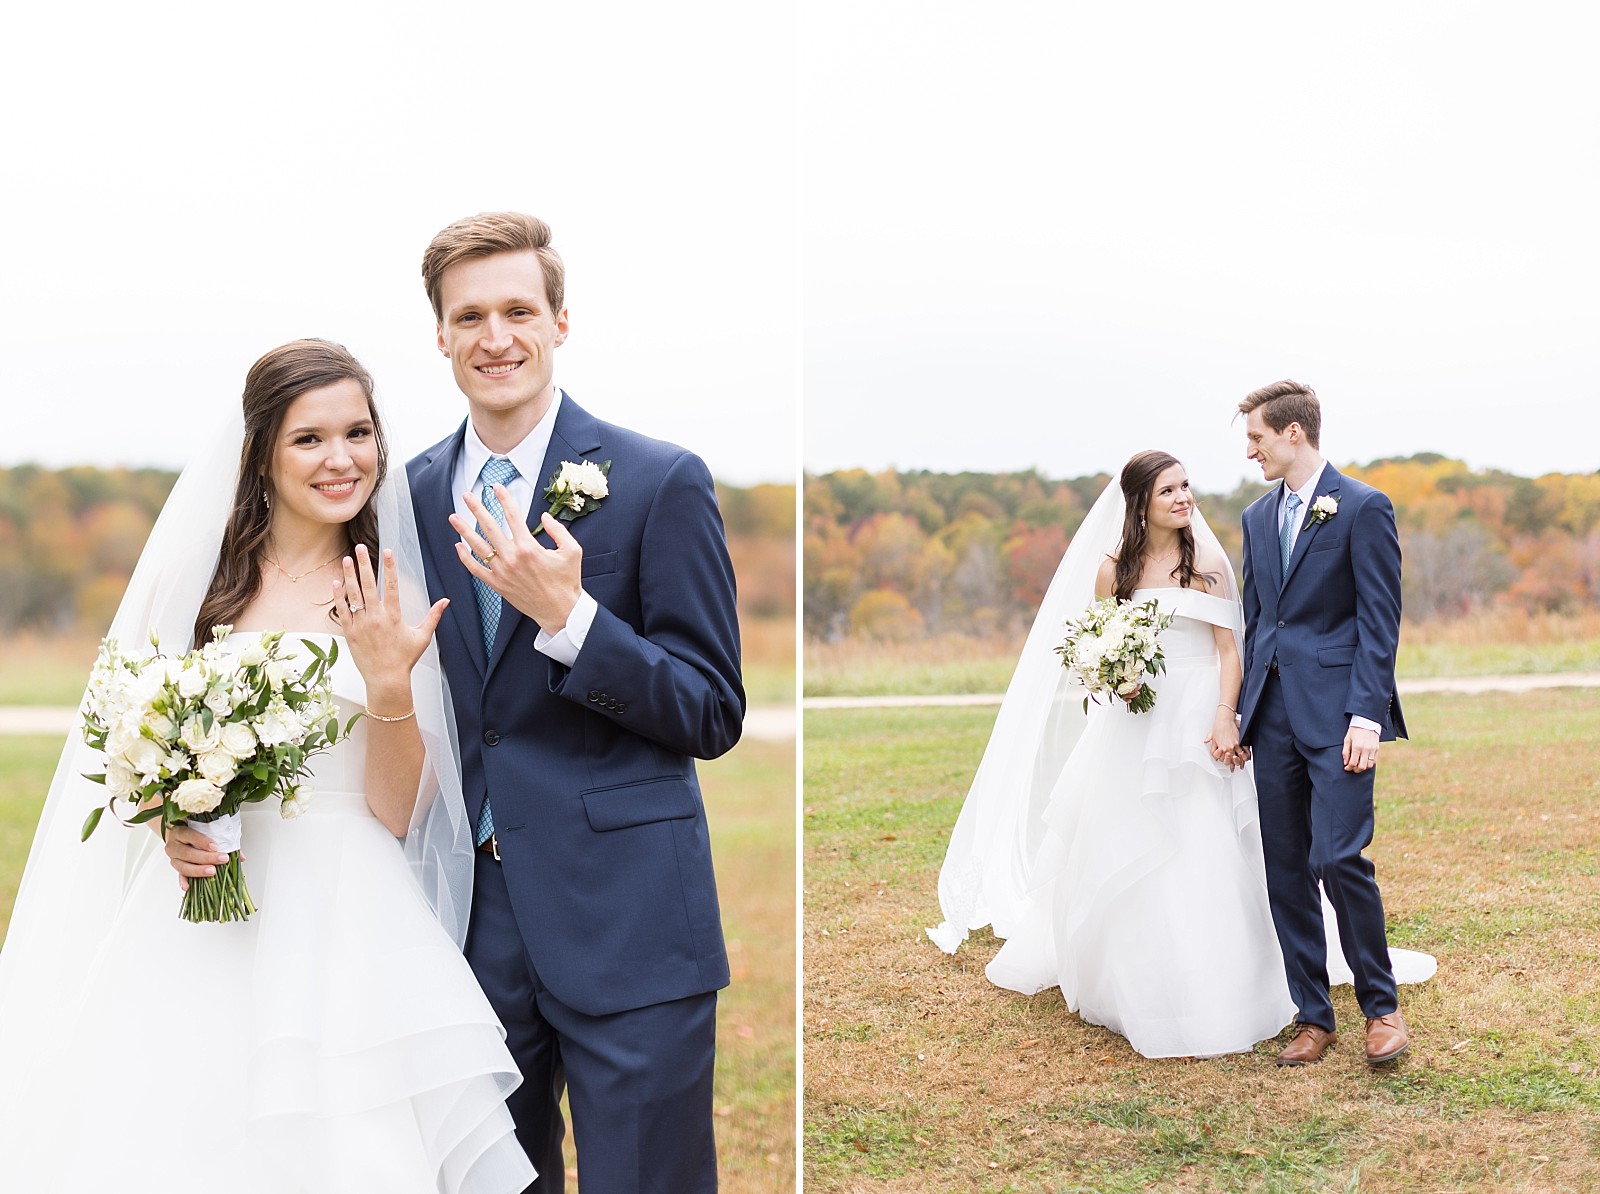 Newlyweds showing off their new wedding bands | Fall Wedding at The Meadows in Raleigh | Raleigh NC Wedding Photographer